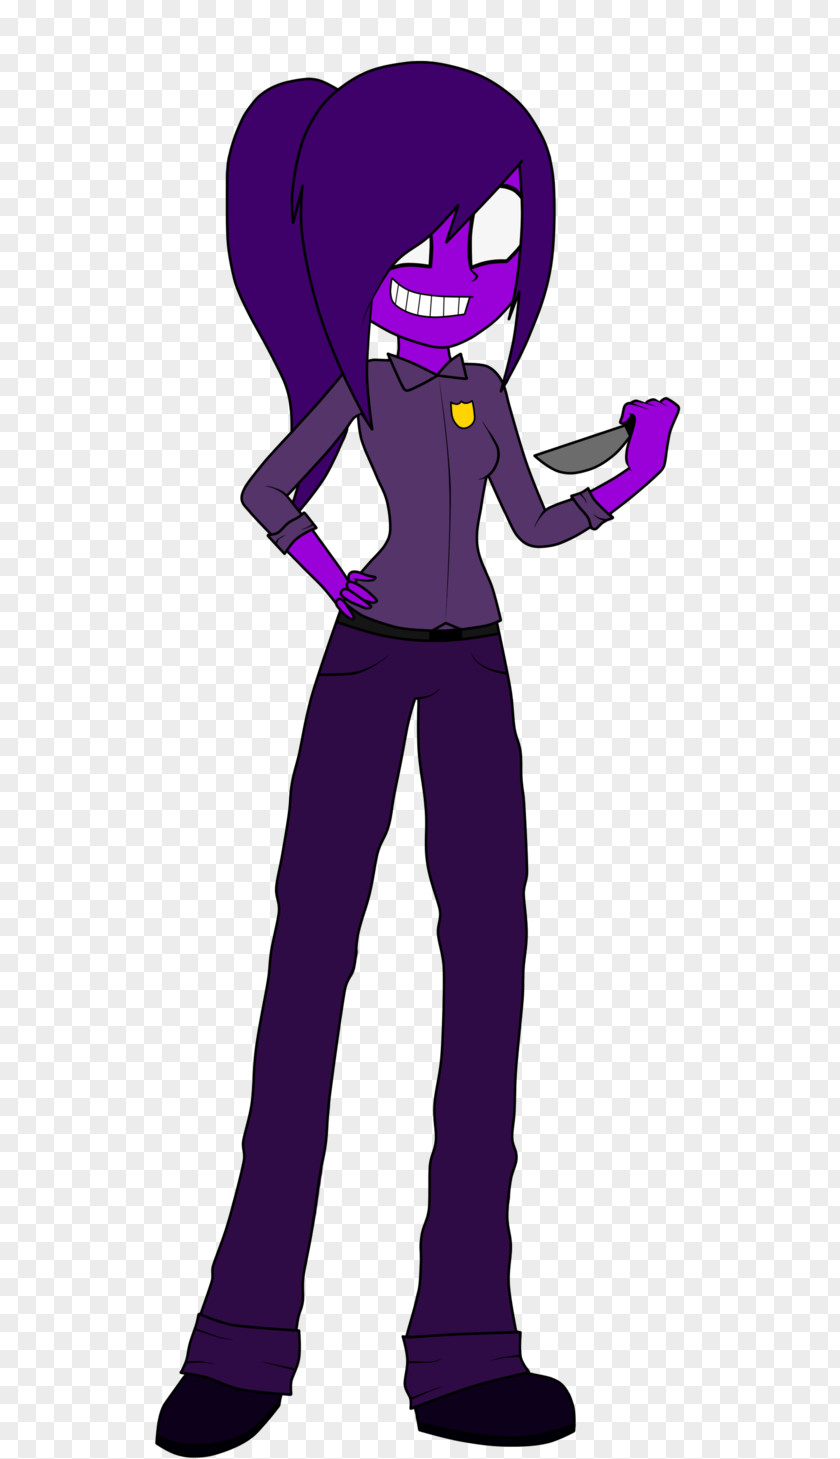 Purple Five Nights At Freddy's 2 Freddy's: Sister Location 4 PNG